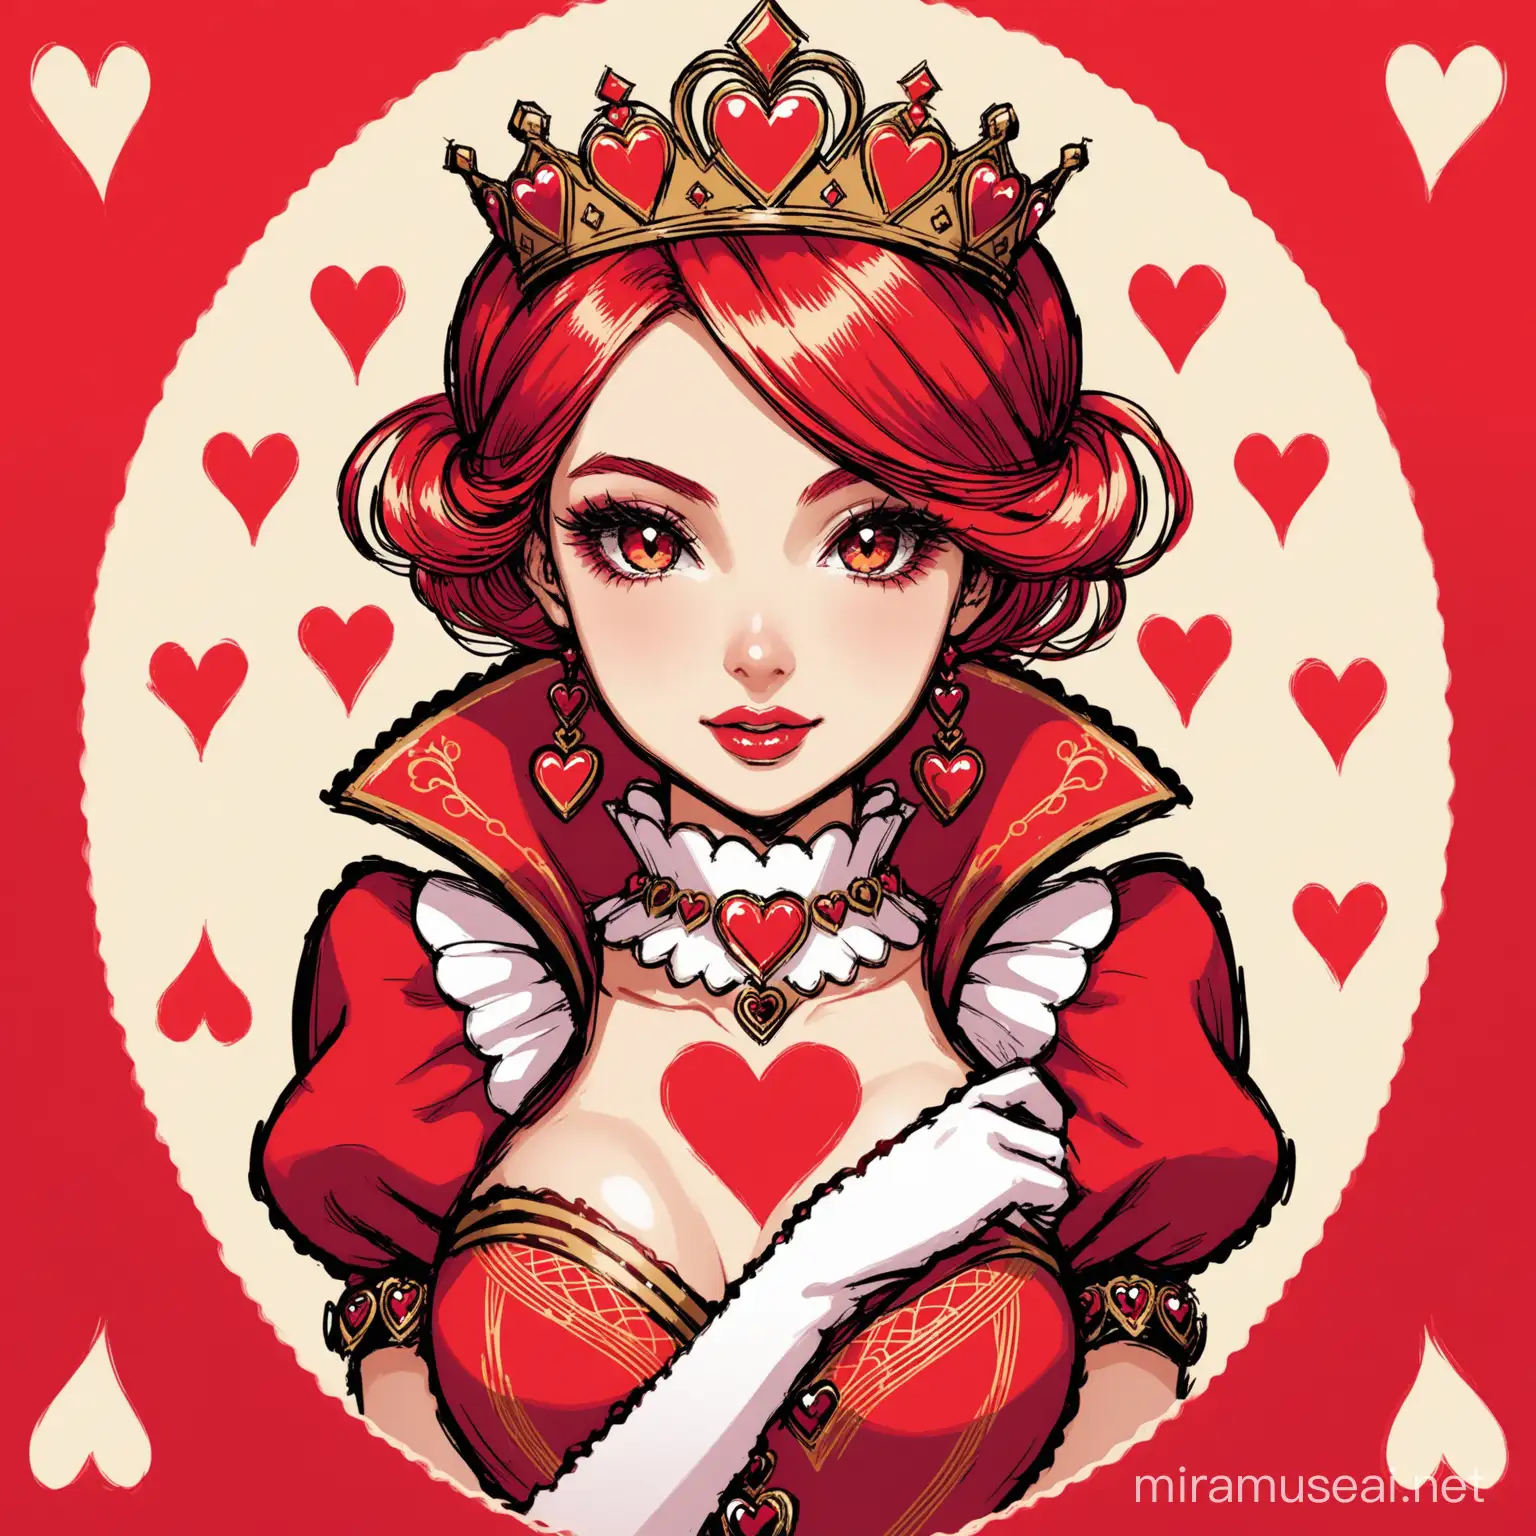 Regal Queen of Hearts in Vibrant Red Dress